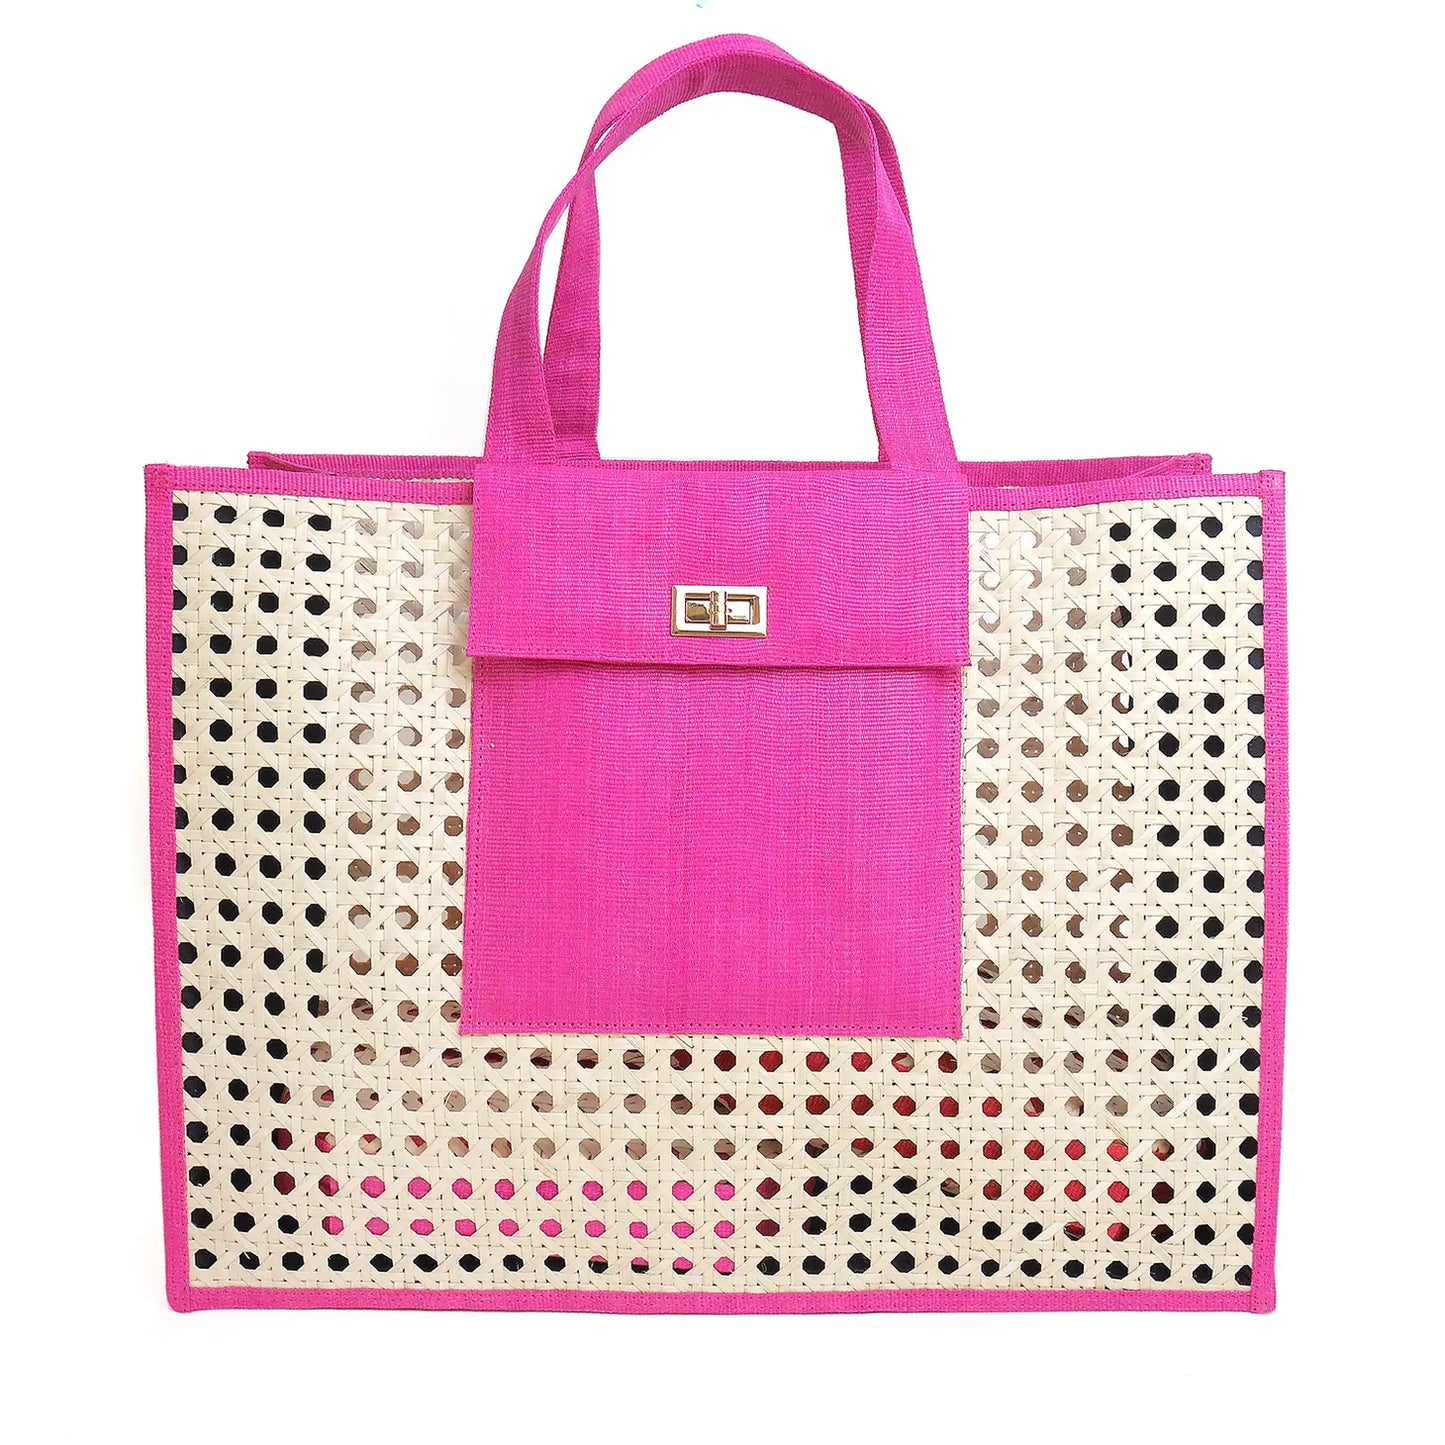 The Christy | Shopper Tote in Hot Pink